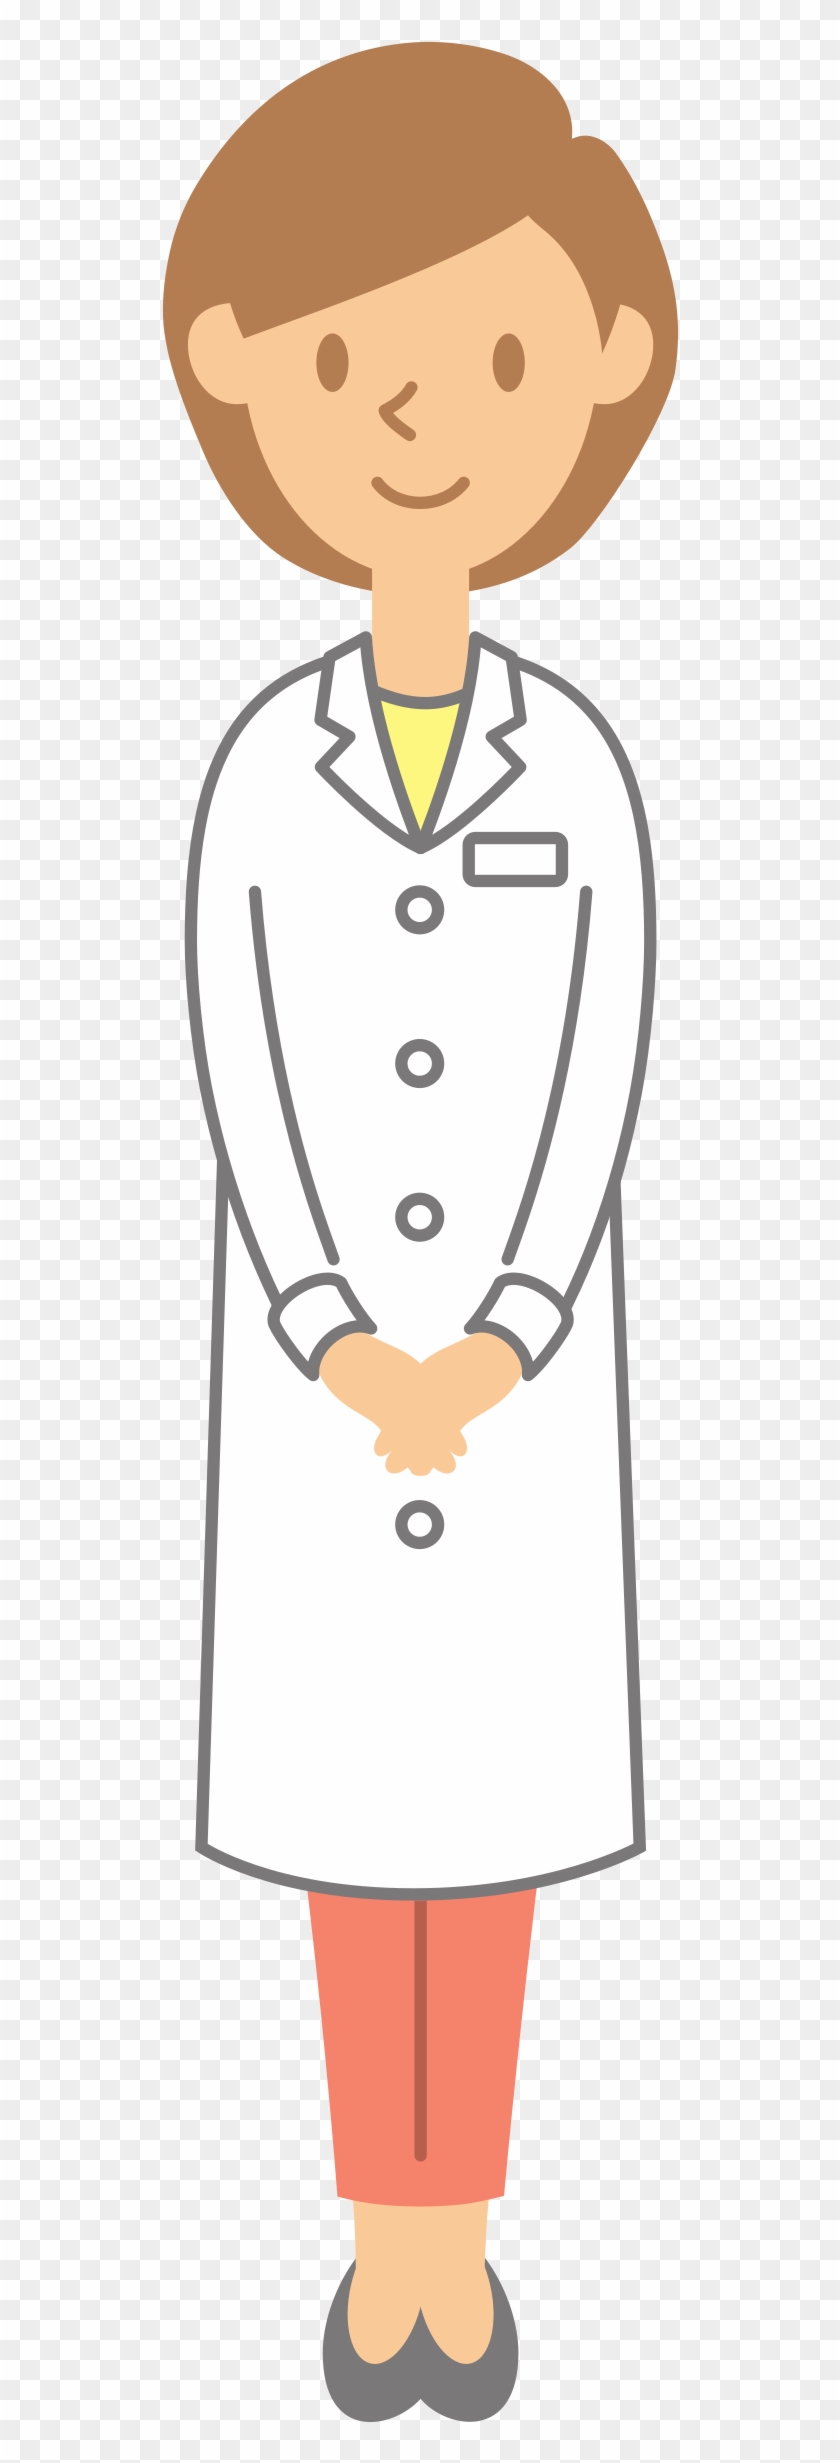 This Free Icons Png Design Of Medical Doctor Clipart #184653